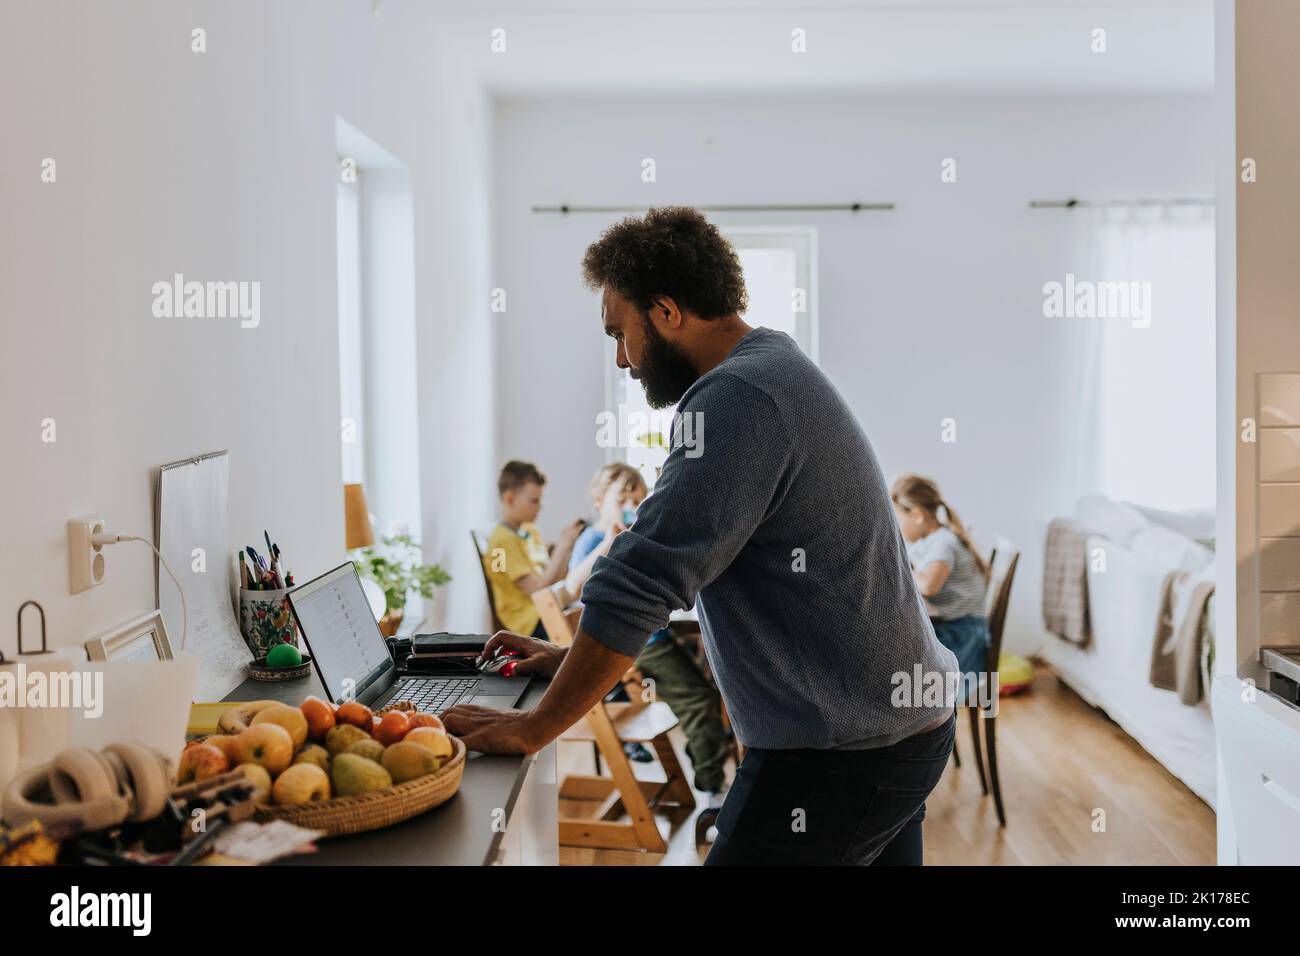 Man working from home and taking care of children Stock Photo